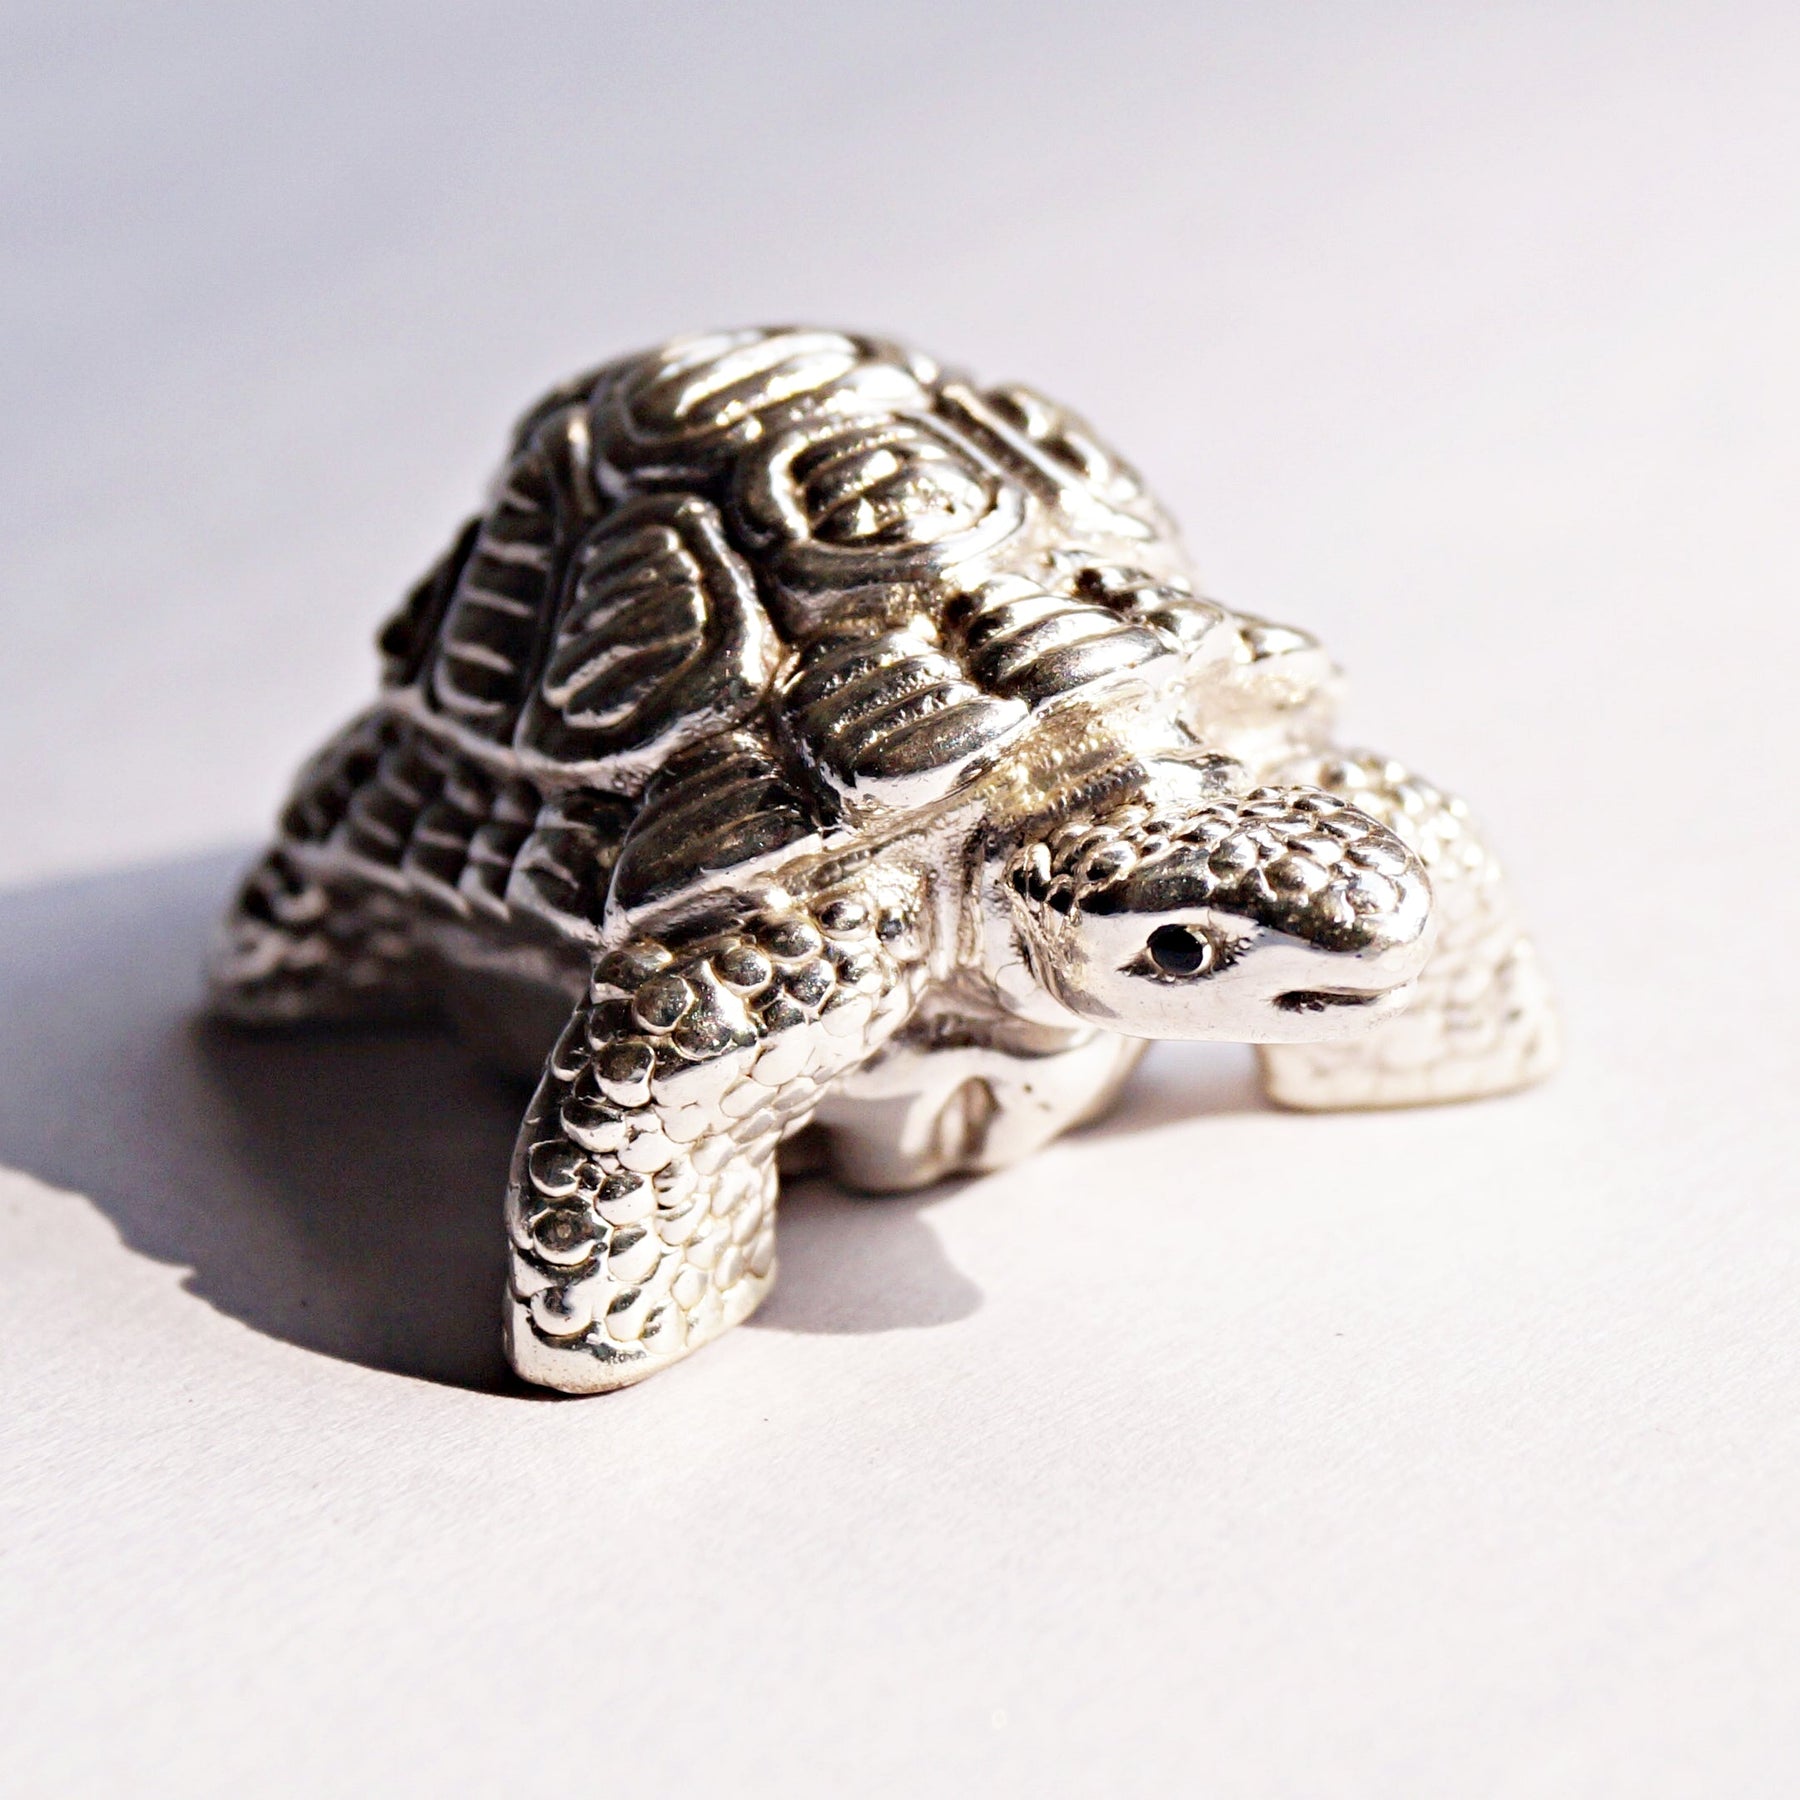 Beads with Tortoise Ring | Shubhanjali | Care for Your Mind, Body & Soul!